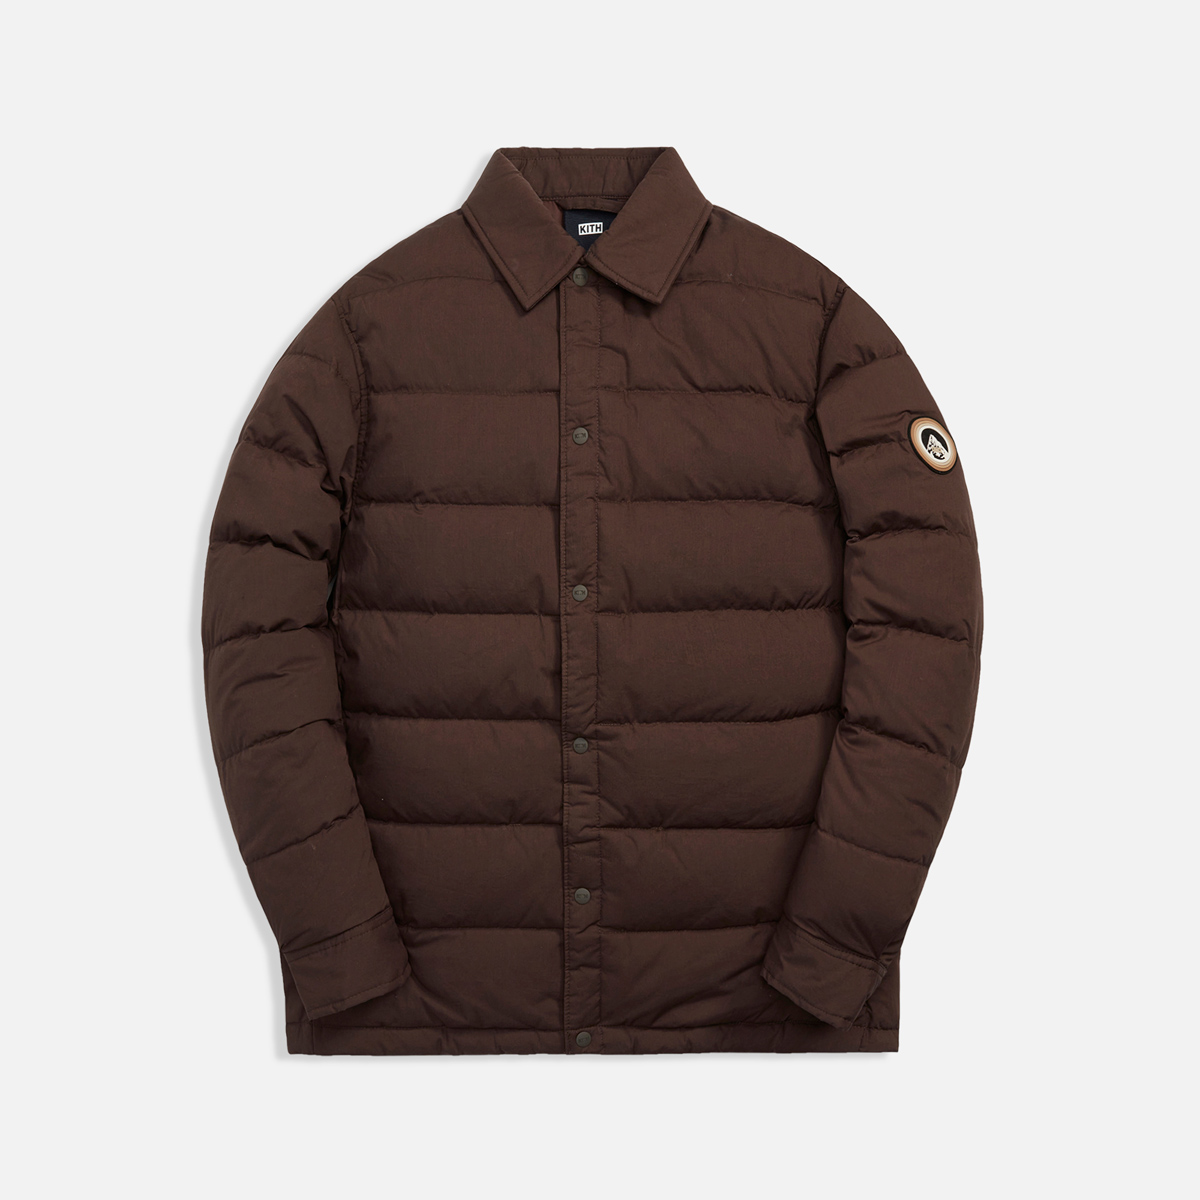 kith-fall-winter-2021-collection-outerwear-032